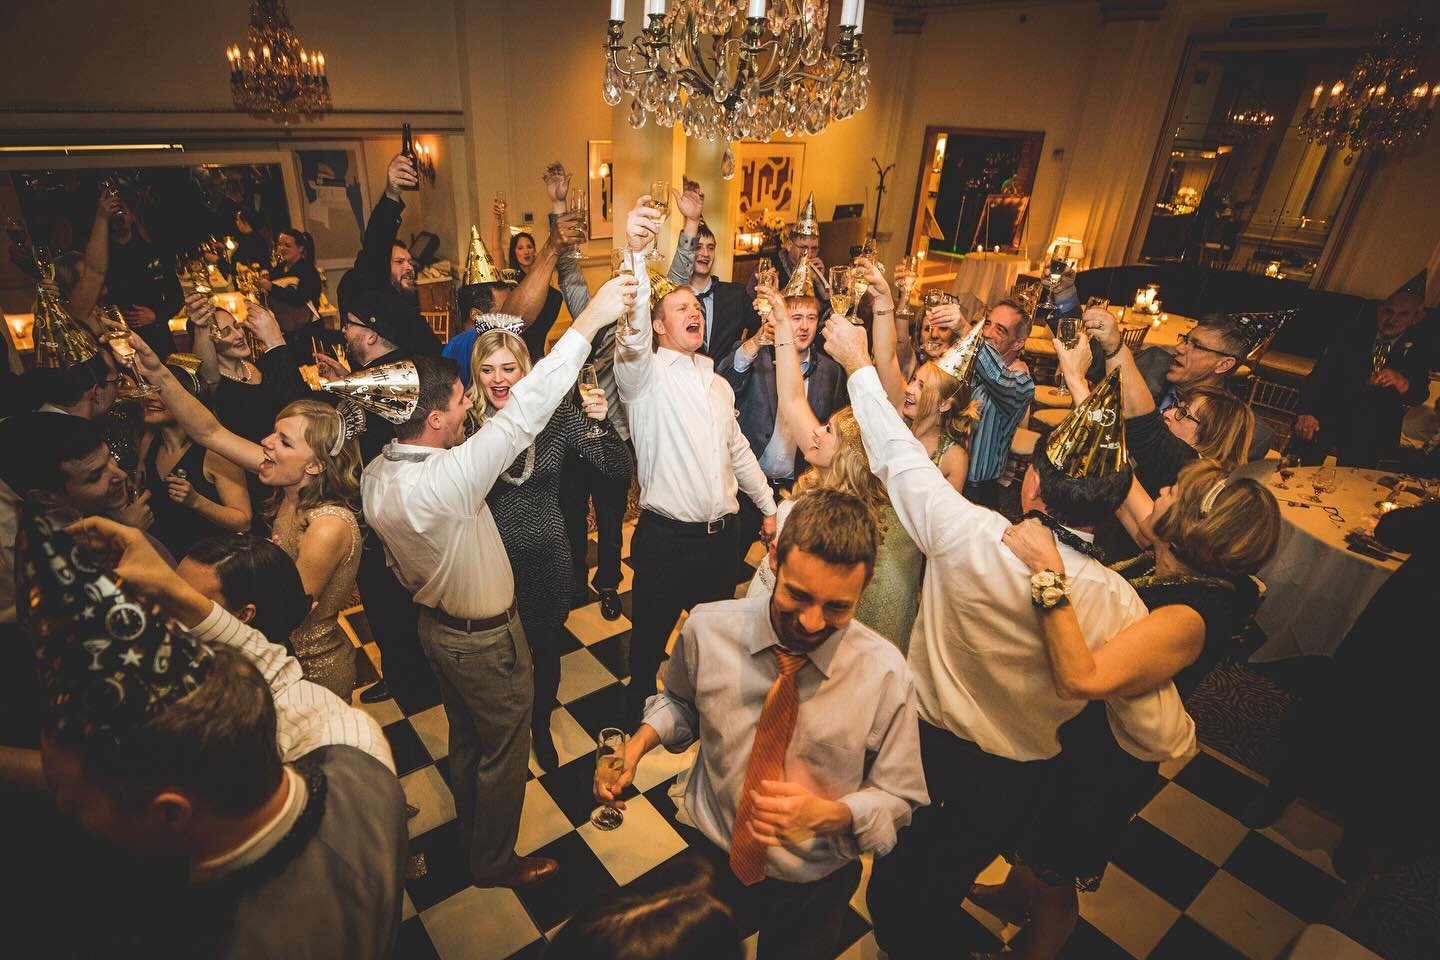 New Years Eve, 7 years ago!

What an amazing way to spend it. Getting married with all your best friends and family, as the party edges towards midnight&hellip;.

Also, I can tell you that photographing a wedding is also a very special way to spend N